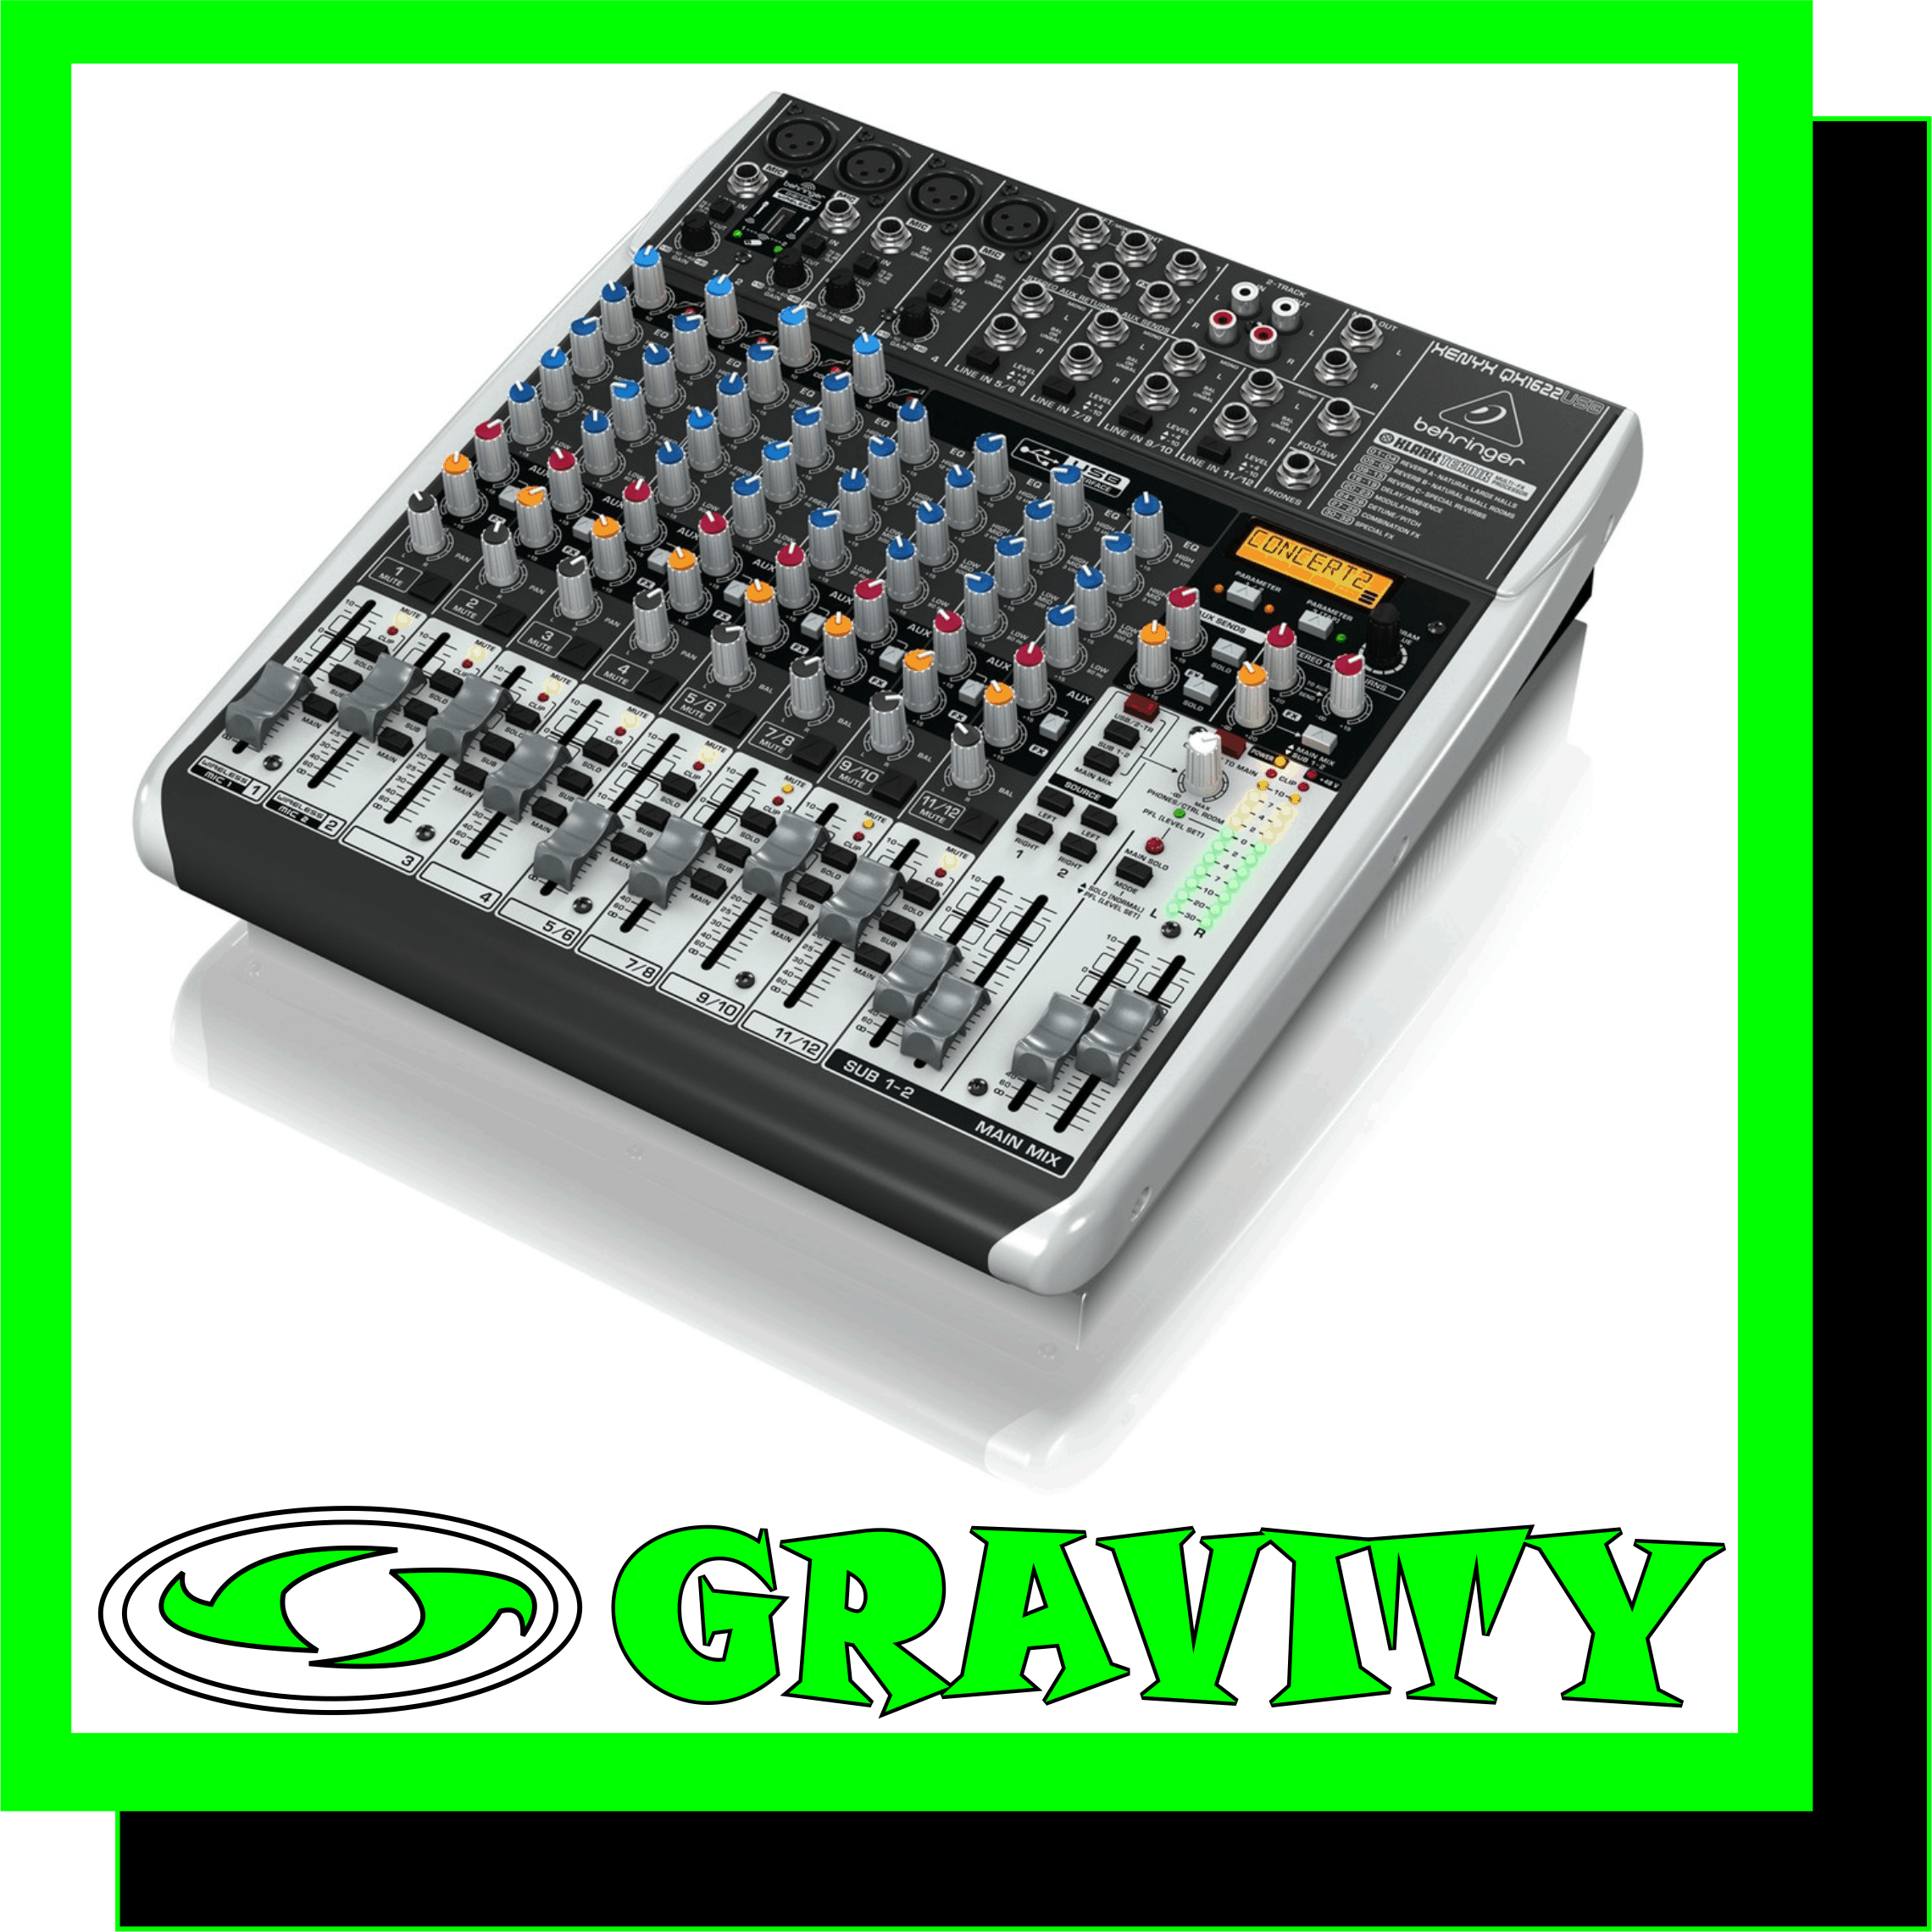 Behringer XENYX QX1622USB 16 Input Mixer  Product Features: -Premium ultra-low noise, high headroom mixer -4 state-of-the-art, phantom-powered XENYX Mic Preamps comparable to stand-alone boutique preamps -4 studio-grade compressors with super-easy “one-knob” functionality and control LED for professional vocal and instrumental sound -Ultra-high quality KLARK TEKNIK FX processor with LCD display, dual-parameters, Tap function and storable user parameter settings -“Wireless-ready” for high-quality BEHRINGER digital wireless system (not included) -Built-in stereo USB/Audio Interface to connect directly to your computer. Free audio recording, editing and podcasting software plus 150 instrument/effect plug-ins -downloadable at behringer.com -Neo-classic “British” 3-band EQs with semi-parametric mid band for warm and musical sound -Channel inserts on each mono channel for flexible connection of outboard equipment -2 aux sends per channel: 1 pre/post fader switchable for monitoring/FX applications, 1 post fader (for internal FX or as external send) -Clip LEDs, mute, main mix and subgroup routing switches, solo and PFL functions on all channels -2 subgroups with separate outputs for added routing flexibility; 2 multi-functional stereo aux returns with flexible routing -Main mix outputs with ¼” jack and gold-plated XLR connectors, separate control room, headphones and stereo rec outputs -Control room/phones outputs with multi-input source matrix; rec inputs assignable to main mix or control room/phones outputs -Long-wearing 60-mm logarithmic-taper faders and sealed rotary controls -“Planet Earth” switching power supply for maximum flexibility (100 – 240 V~), noise-free audio, superior transient response plus low power consumption for energy saving -High-quality components and exceptionally rugged construction ensure long life -Conceived and designed by BEHRINGER Germany  The compact XENYX QX1622USB mixer allows you to effortlessly achieve premium-quality sound, thanks to its 4 onboard studio-grade XENYX Mic Preamps, super-easy one- knob studio-grade compressors and ultra-musical British channel EQs with semi-parametric mid band for warm and musical sound. And our easy-to-use one-knob compressors provide total dynamic control for the ultimate in punch and clarity, while respecting all the power and emotion you pack into every note. Add to this our KLARK TEKNIK FX processor with 32 studio-grade presets with dual addressable parameters, Tap function and storable user parameter settings and the QX1622USB becomes an incredibly versatile mixer for your live performances. But the XENYX QX1622USB isnt just designed to handle your live gigs; they also provide the state-of-the-art tools you need to make stunning, professional-quality recordings. Along with their built-in USB/audio interfaces, XENYX QX1622USB comes with all the recording and editing software needed to turn your computer system into a complete, high- performance home recording studio.